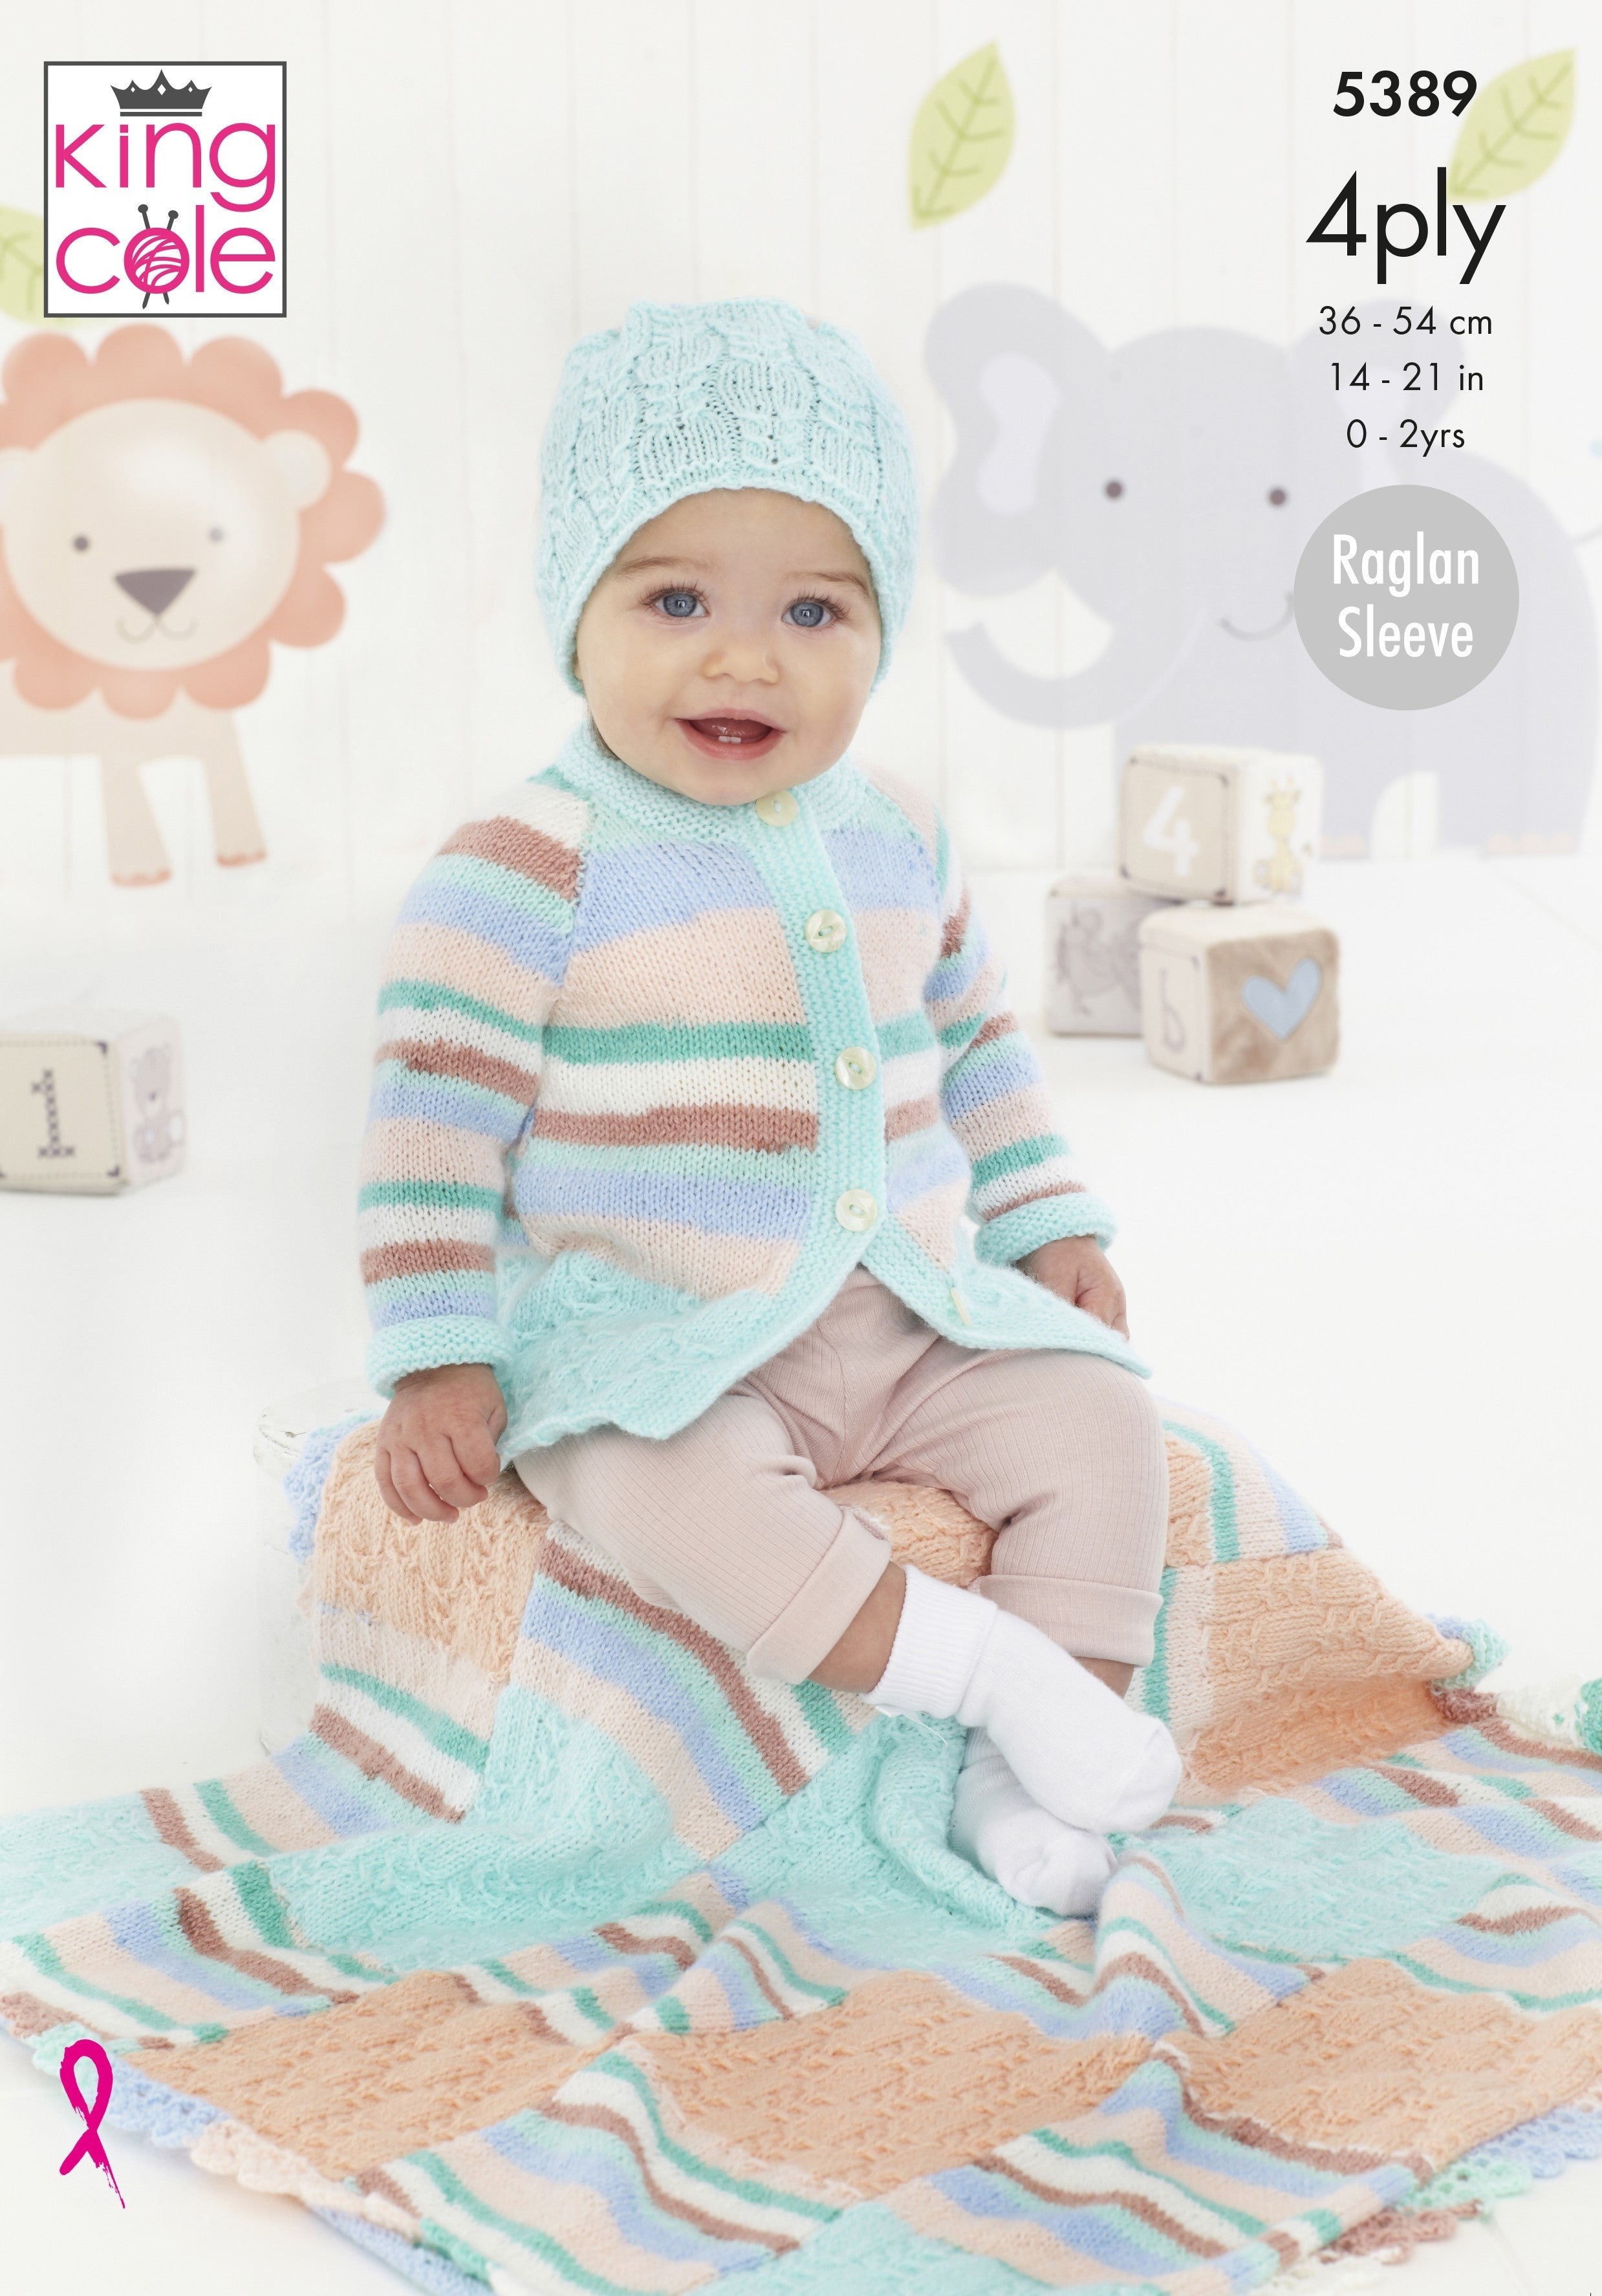 Coat, Cardigan, Hat and Blanket - King Cole 5389